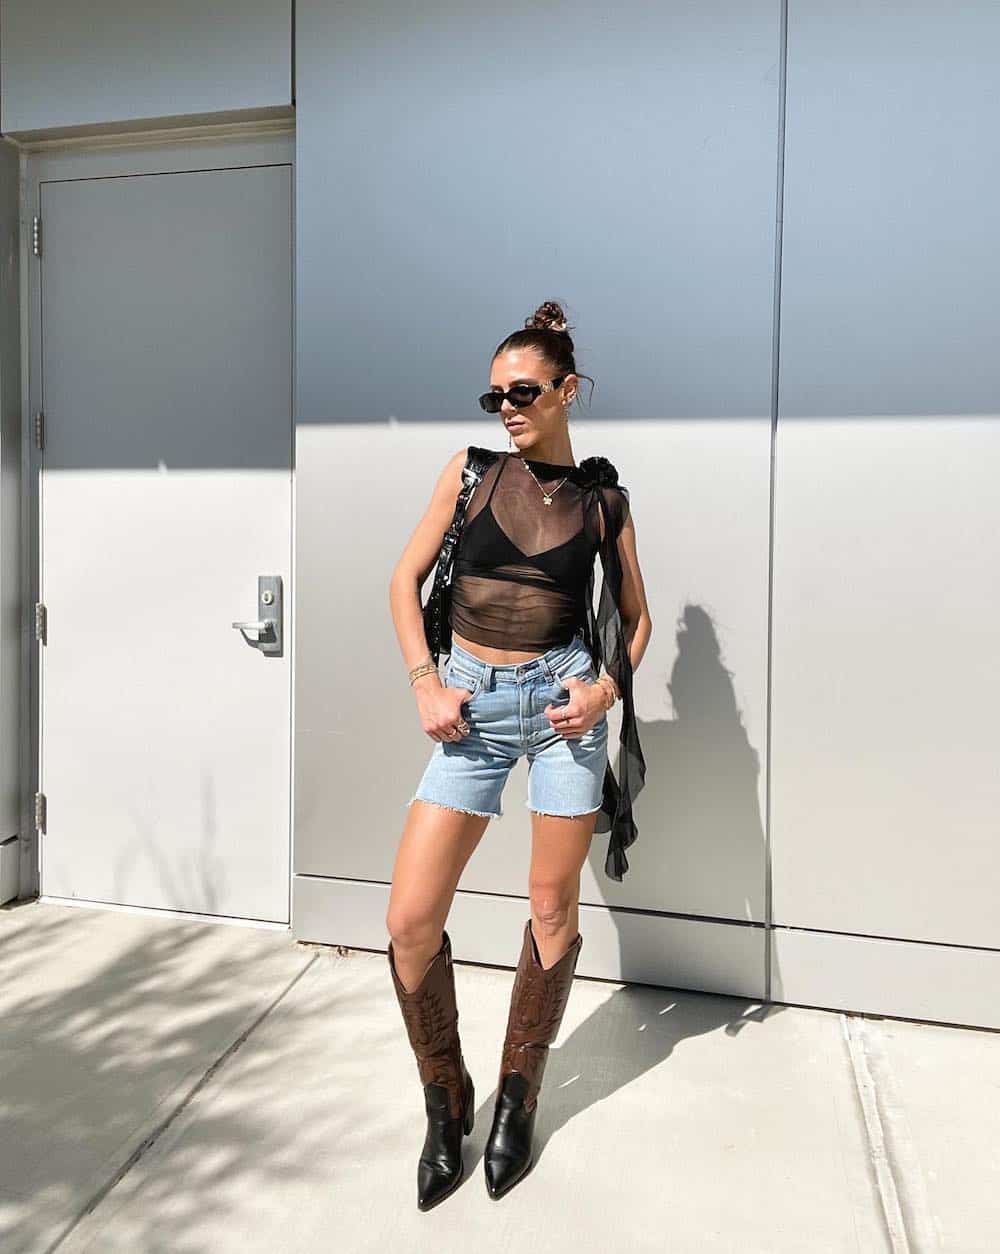 A woman wearing a black bralette, a black mesh top, light-washed denim shorts, and espresso brown and black cowboy boots